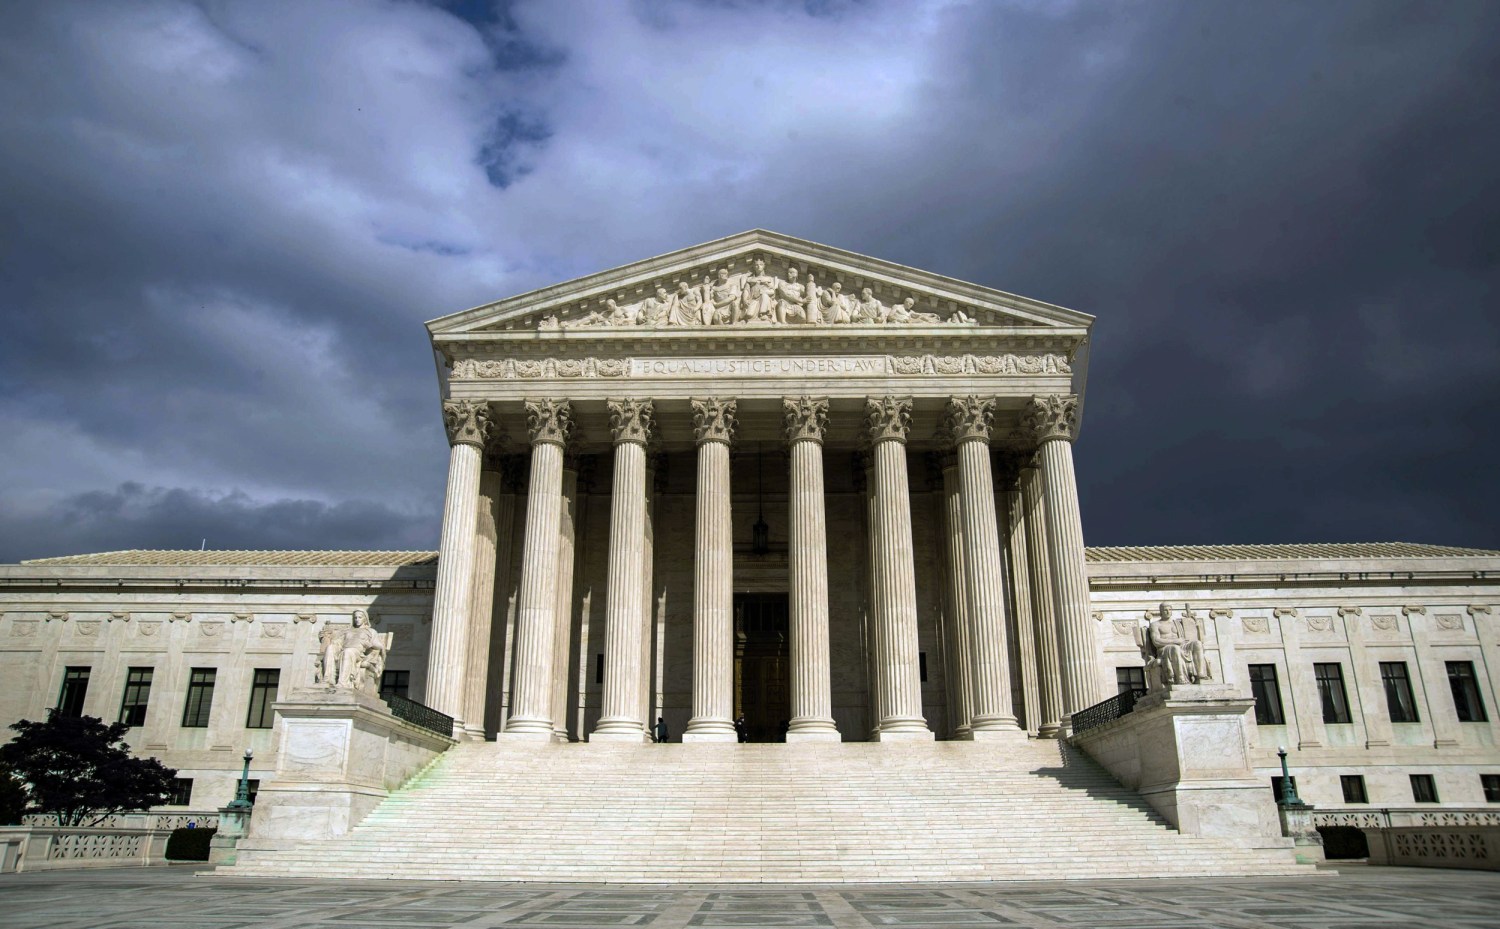 Drawing Of The United States Supreme Court Building Background